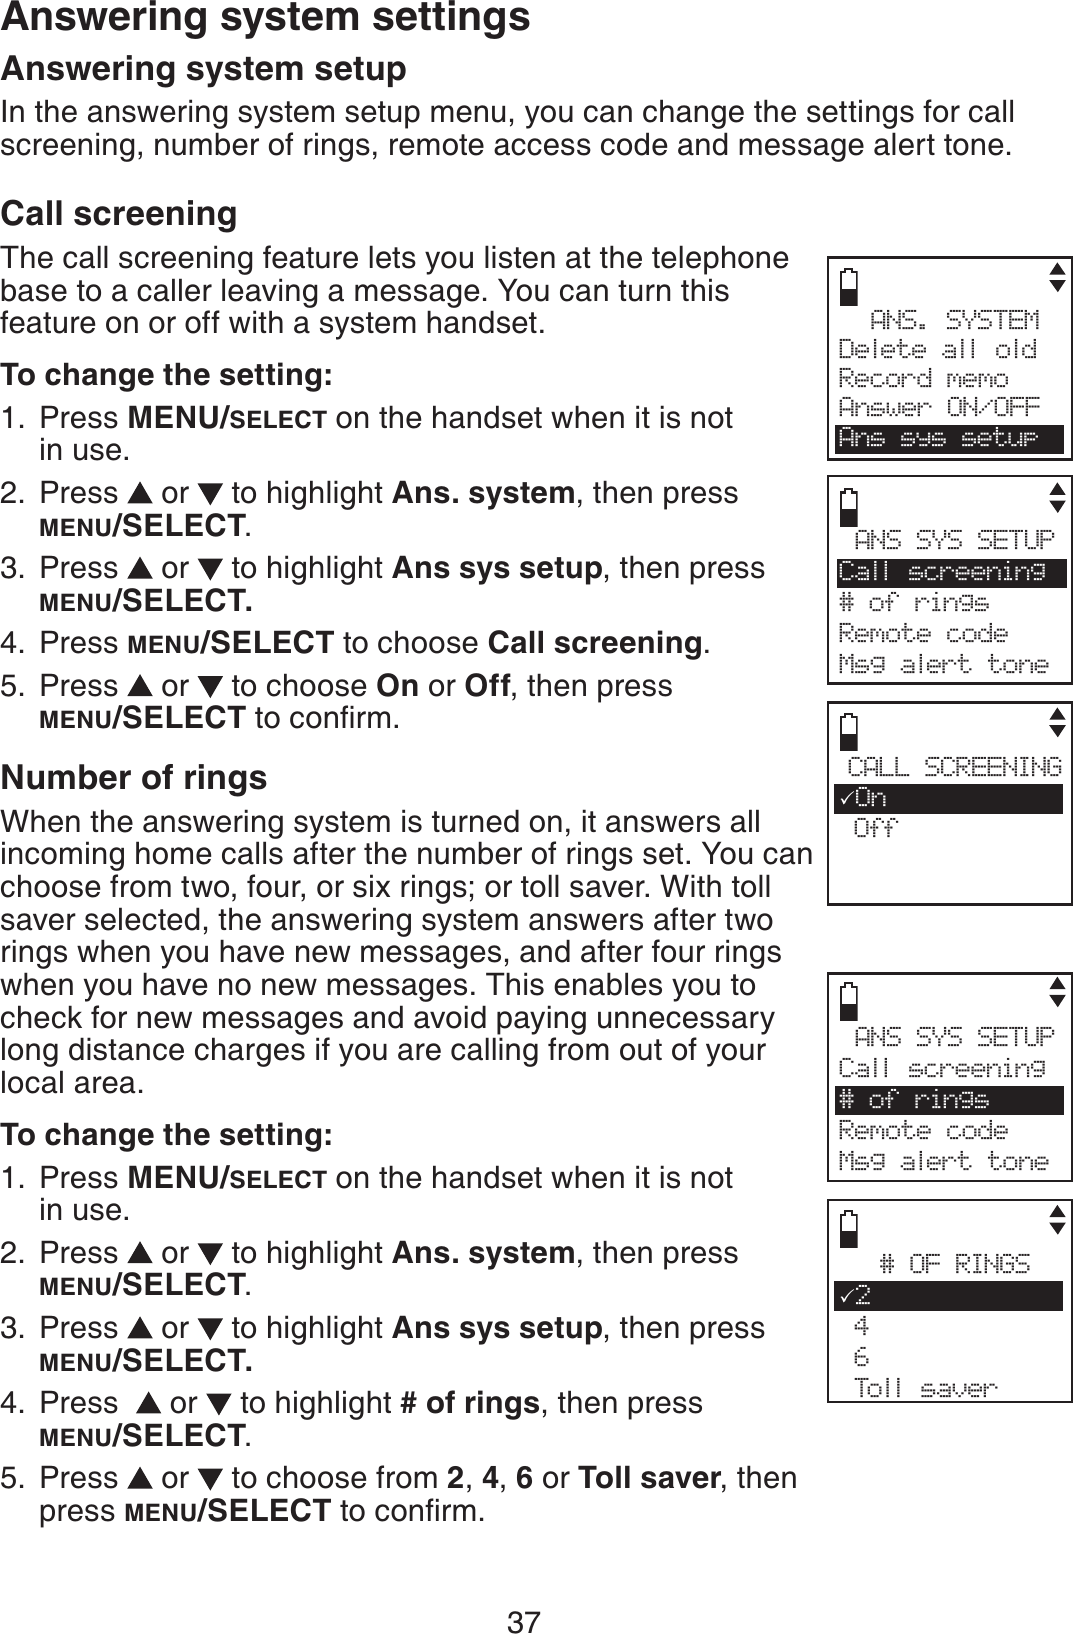 37Answering system setupIn the answering system setup menu, you can change the settings for call screening, number of rings, remote access code and message alert tone. Call screeningThe call screening feature lets you listen at the telephone base to a caller leaving a message. You can turn this feature on or off with a system handset.To change the setting:Press MENU/SELECT on the handset when it is not in use.Press   or   to highlight Ans. system, then press MENU/SELECT.Press   or   to highlight Ans sys setup, then press MENU/SELECT.Press MENU/SELECT to choose Call screening.Press   or   to choose On or Off, then press MENU/SELECTVQEQPſTONumber of ringsWhen the answering system is turned on, it answers all incoming home calls after the number of rings set. You can choose from two, four, or six rings; or toll saver. With toll saver selected, the answering system answers after two rings when you have new messages, and after four rings when you have no new messages. This enables you to check for new messages and avoid paying unnecessary long distance charges if you are calling from out of your local area.To change the setting:Press MENU/SELECT on the handset when it is not in use.Press   or   to highlight Ans. system, then press MENU/SELECT.Press   or   to highlight Ans sys setup, then press MENU/SELECT.Press    or   to highlight # of rings, then press MENU/SELECT.Press  or  to choose from 2,4,6 or Toll saver, then press MENU/SELECT VQEQPſTO.1.2.3.4.5.1.2.3.4.5.Answering system settingsANS. SYSTEMDelete all oldRecord memoAnswer ON/OFFAns sys setupANS SYS SETUPCall screening# of ringsRemote codeMsg alert toneCALL SCREENING3On OffANS SYS SETUPCall screening# of ringsRemote code Msg alert tone# OF RINGS32 4 6 Toll saver